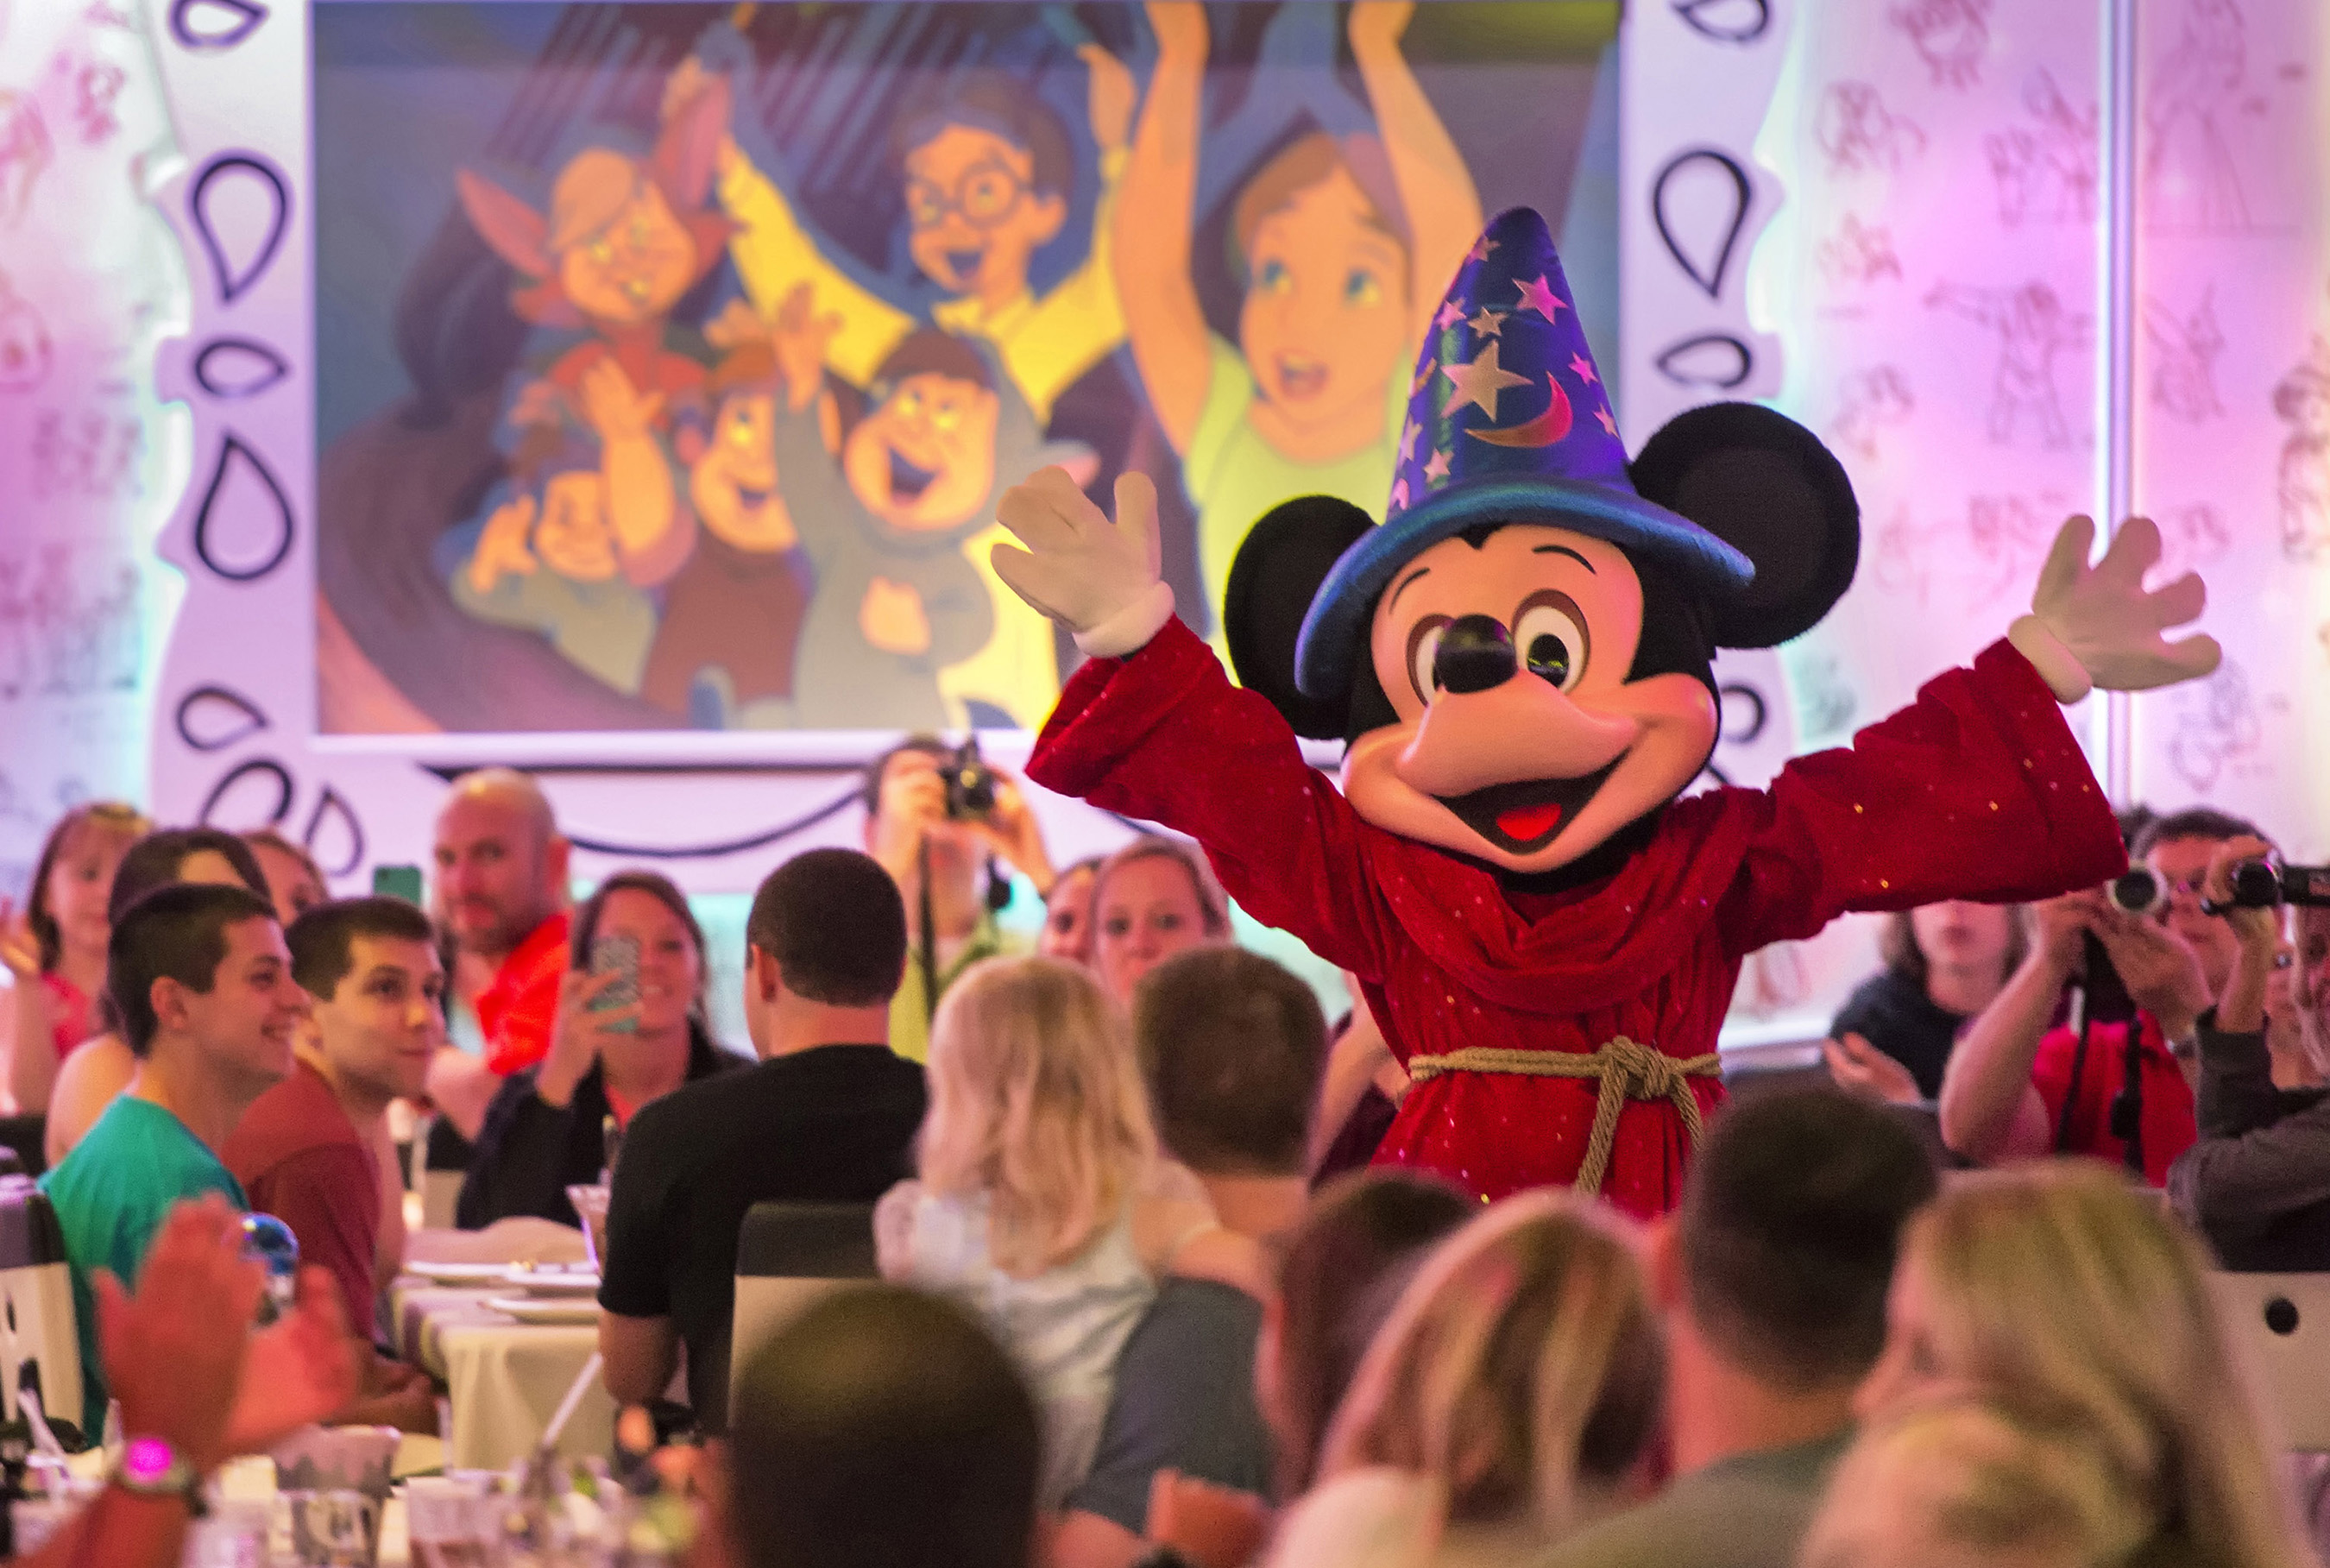 Sorcerer Mickey at character meal